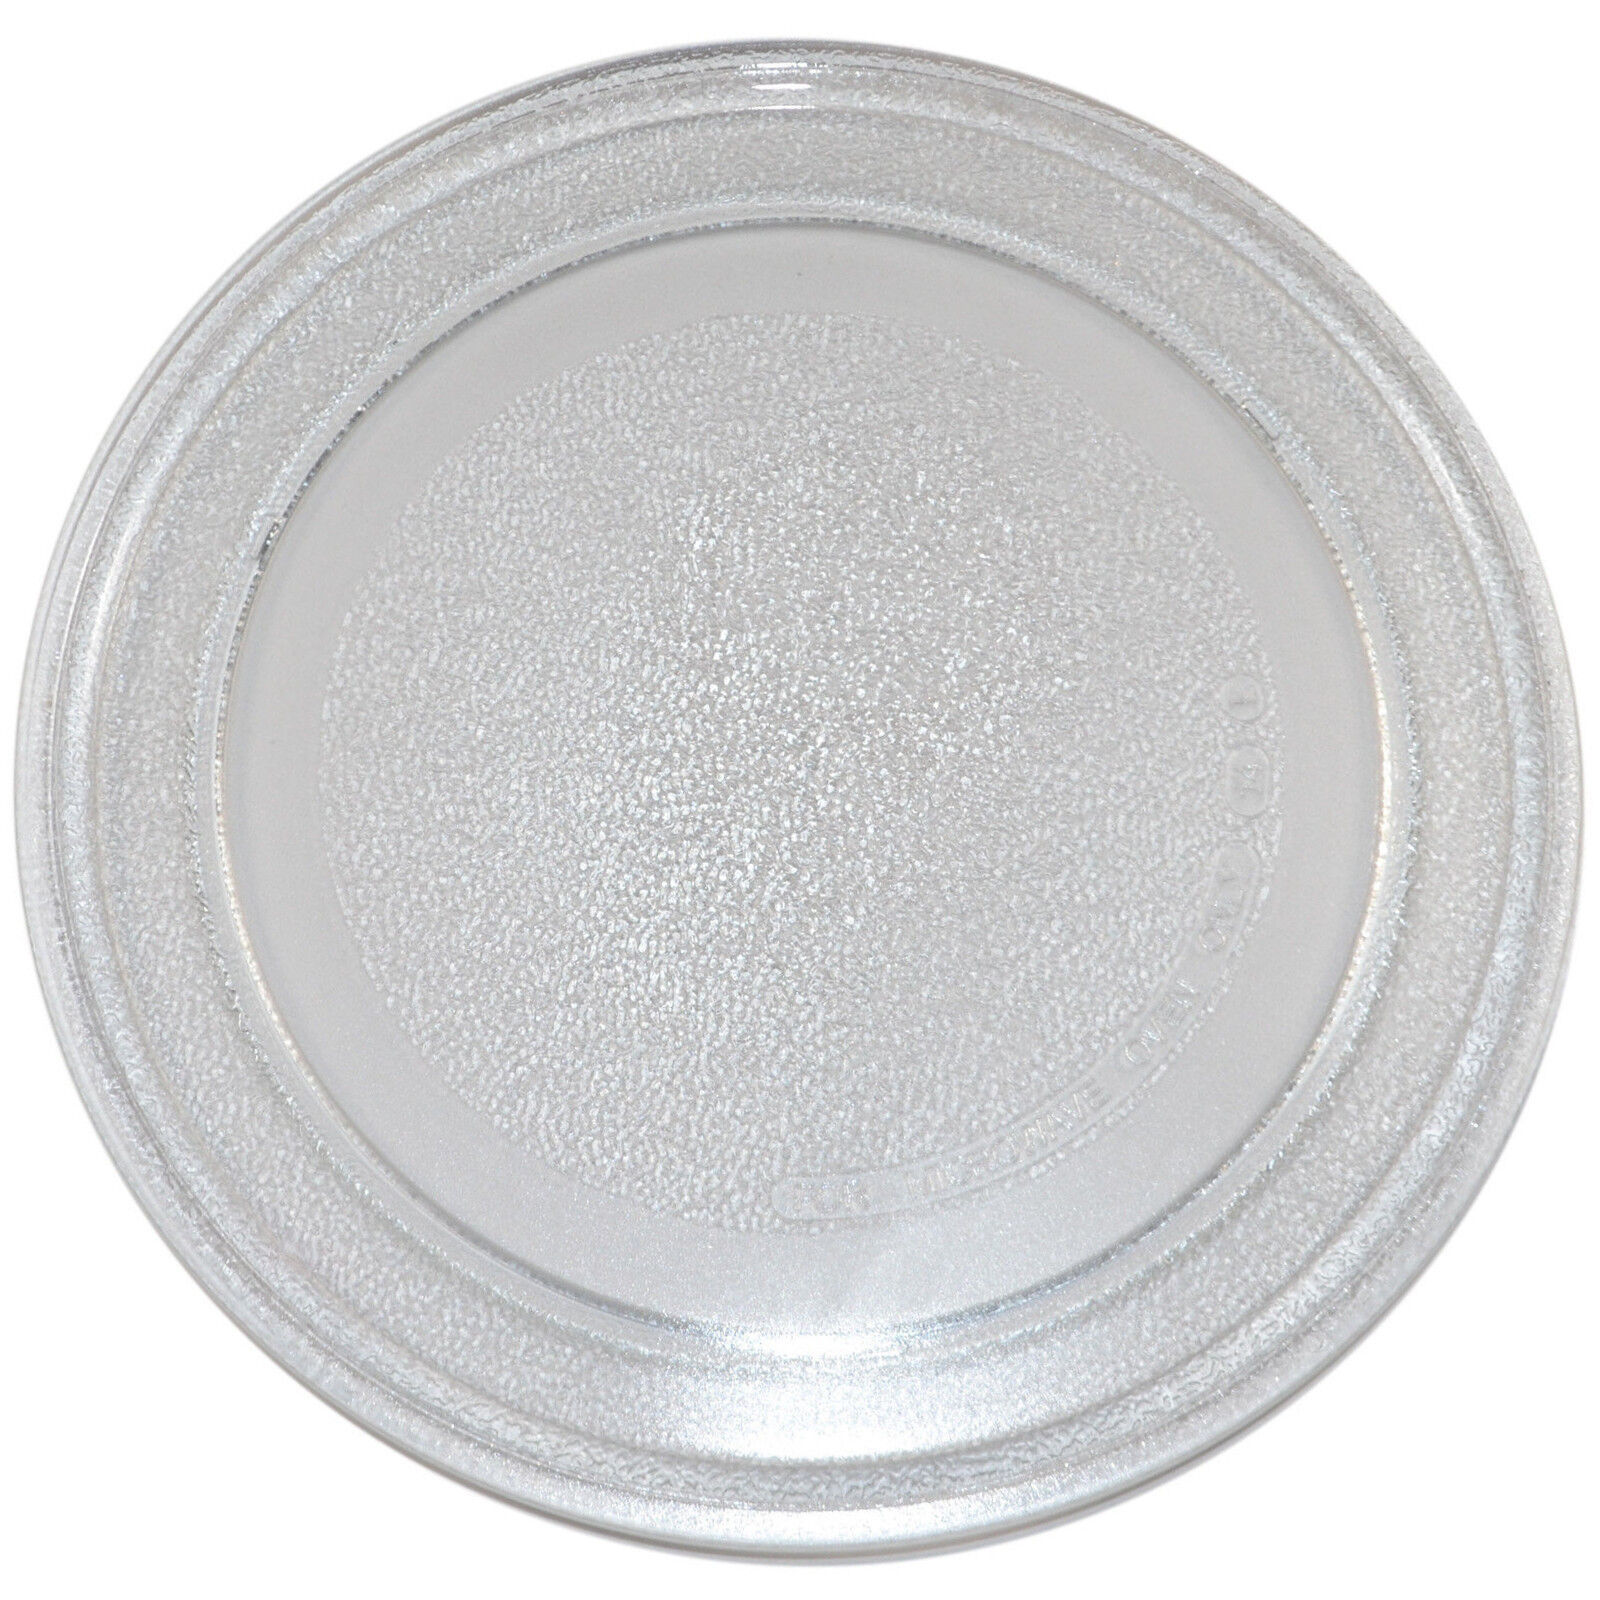 9-5/8" Glass Turntable Tray for GE WB49X10134 Microwave Oven Cooking Plate 245mm - $41.99